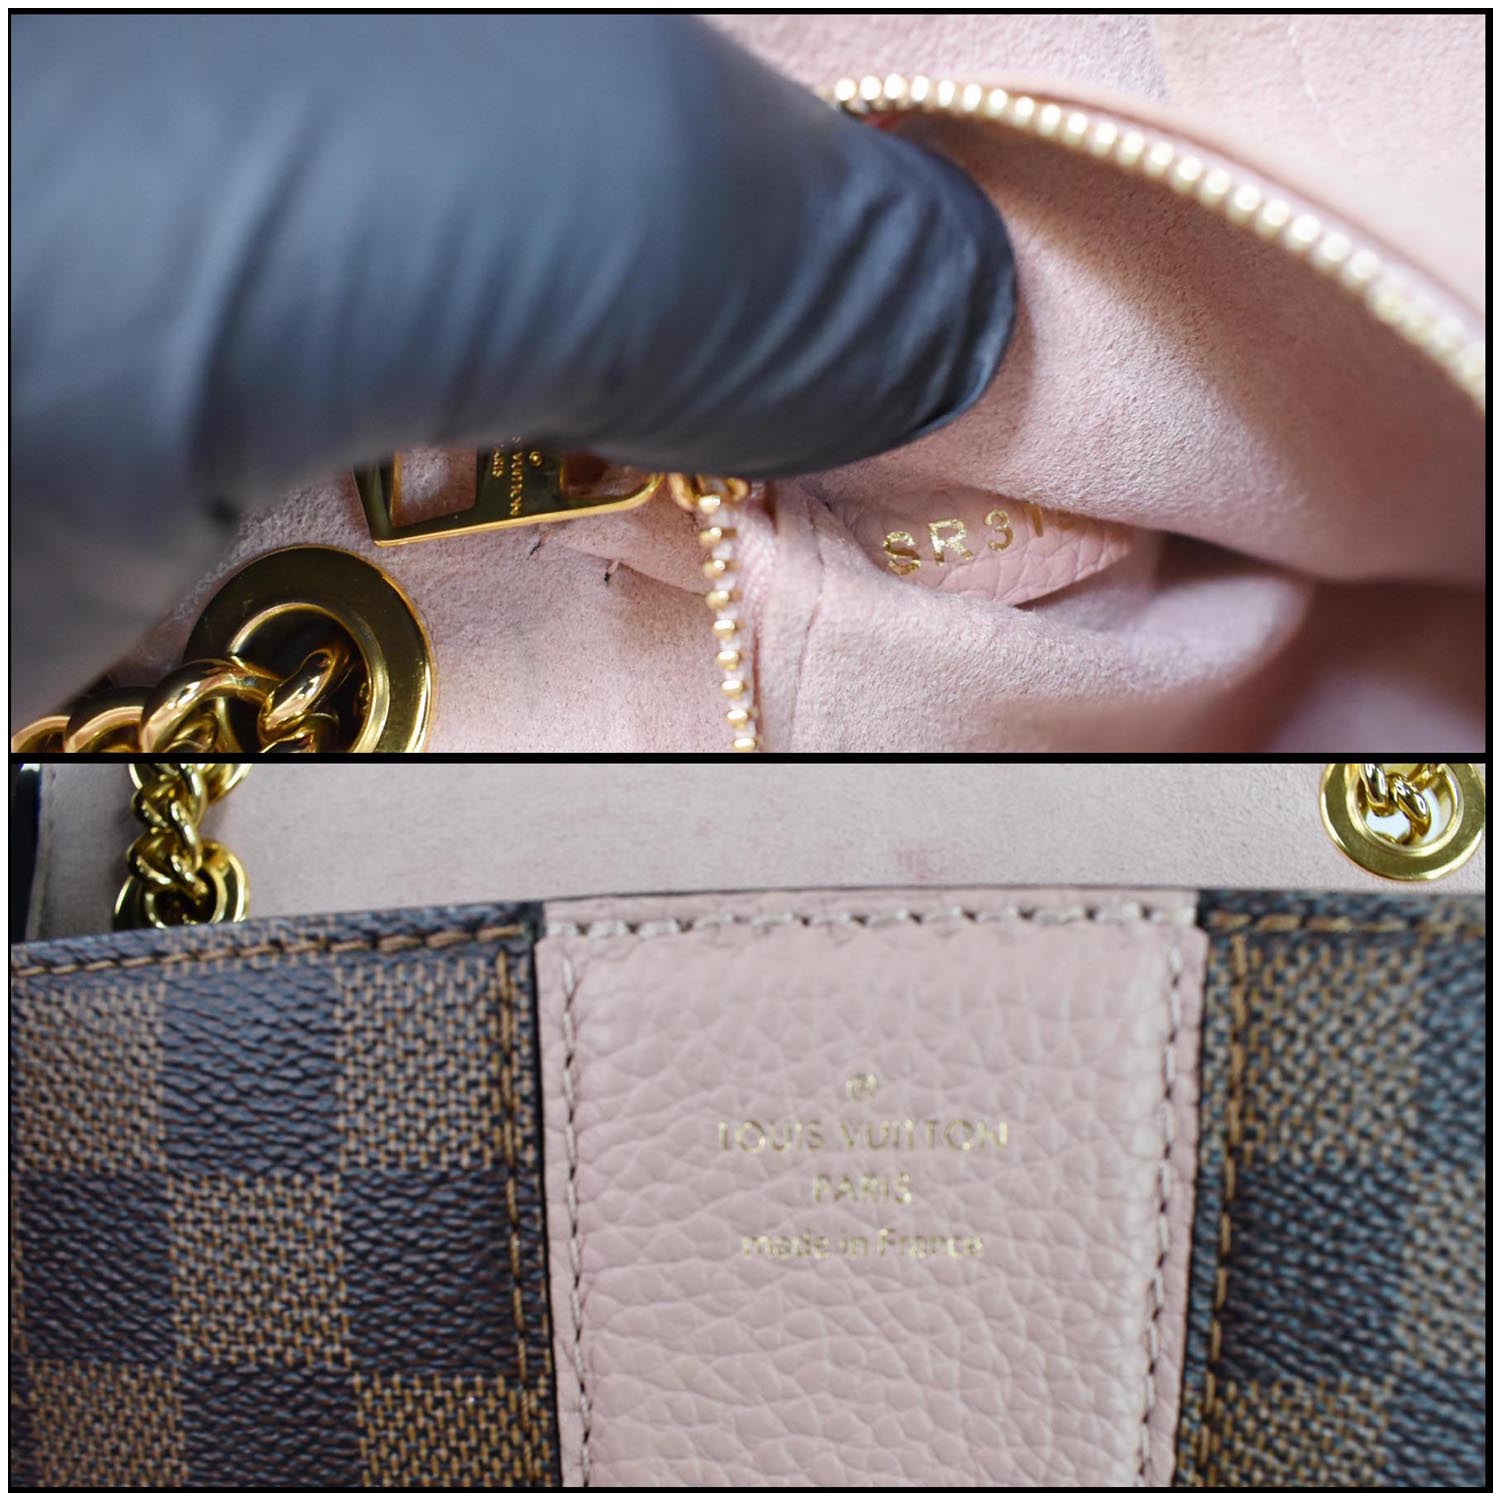 What's Best For You Louis Vuitton Alma Bb Damier Ebene Or Bond Street Bb  With Magnolia Leather? 